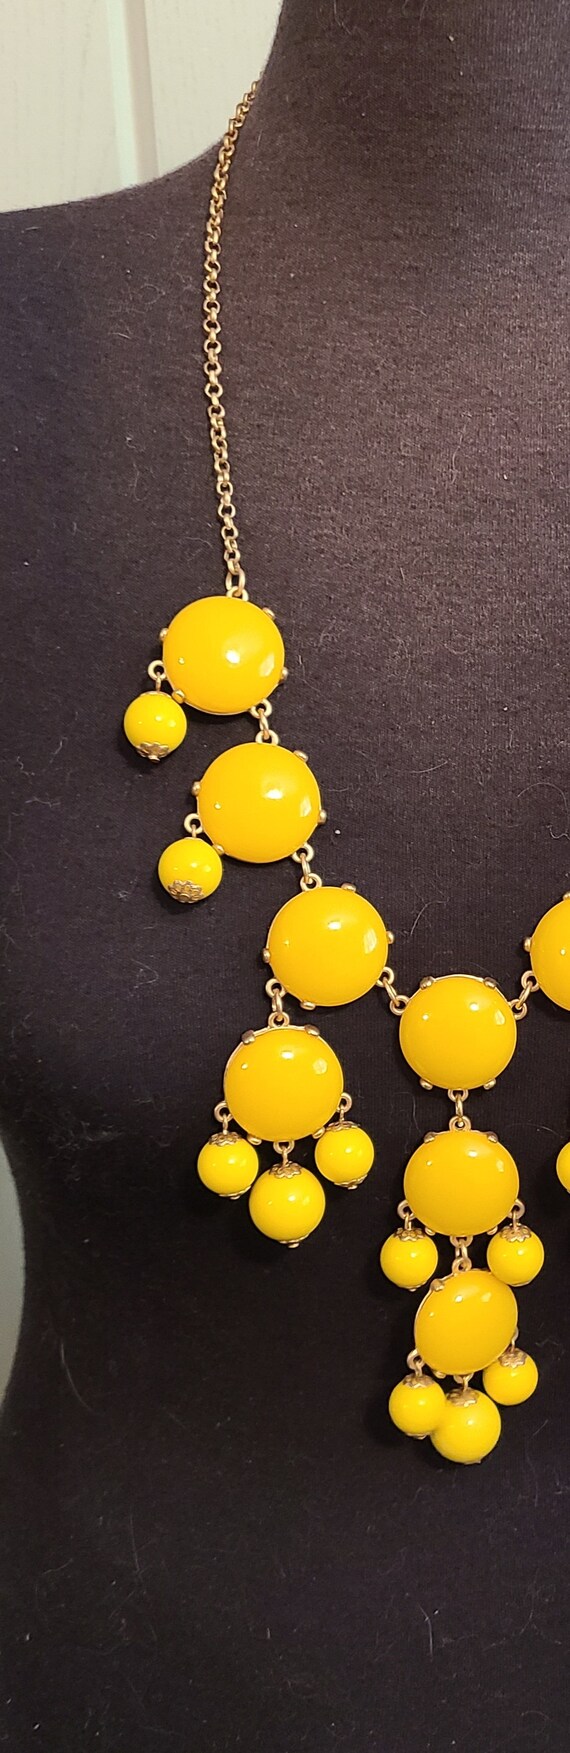 Bright Yellow Vintage Statement Bubble Necklace - image 4